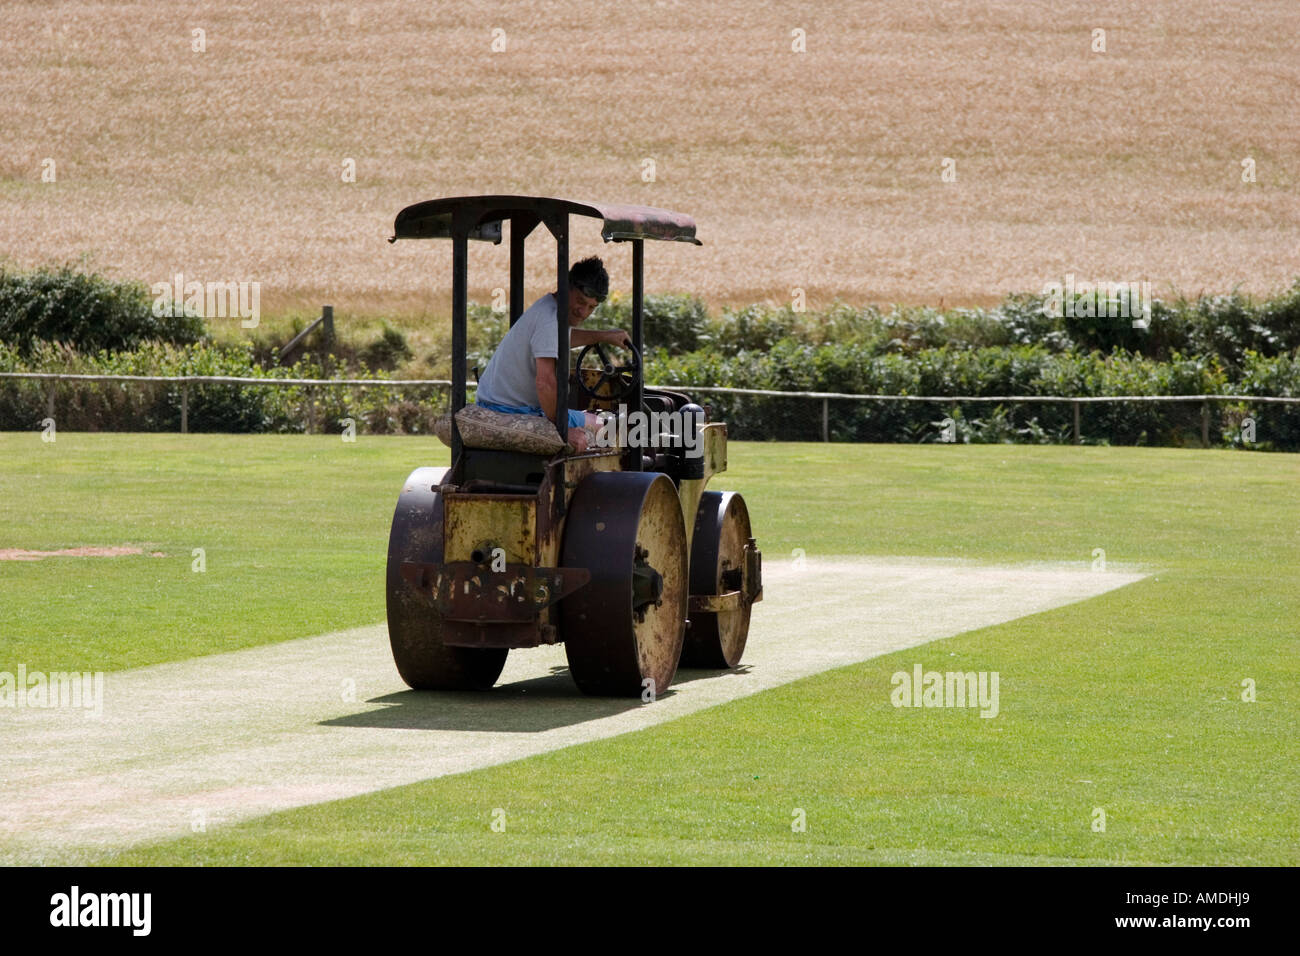 Mechanical roller irons out any bumps on the cricket pitch and wicket Stock Photo